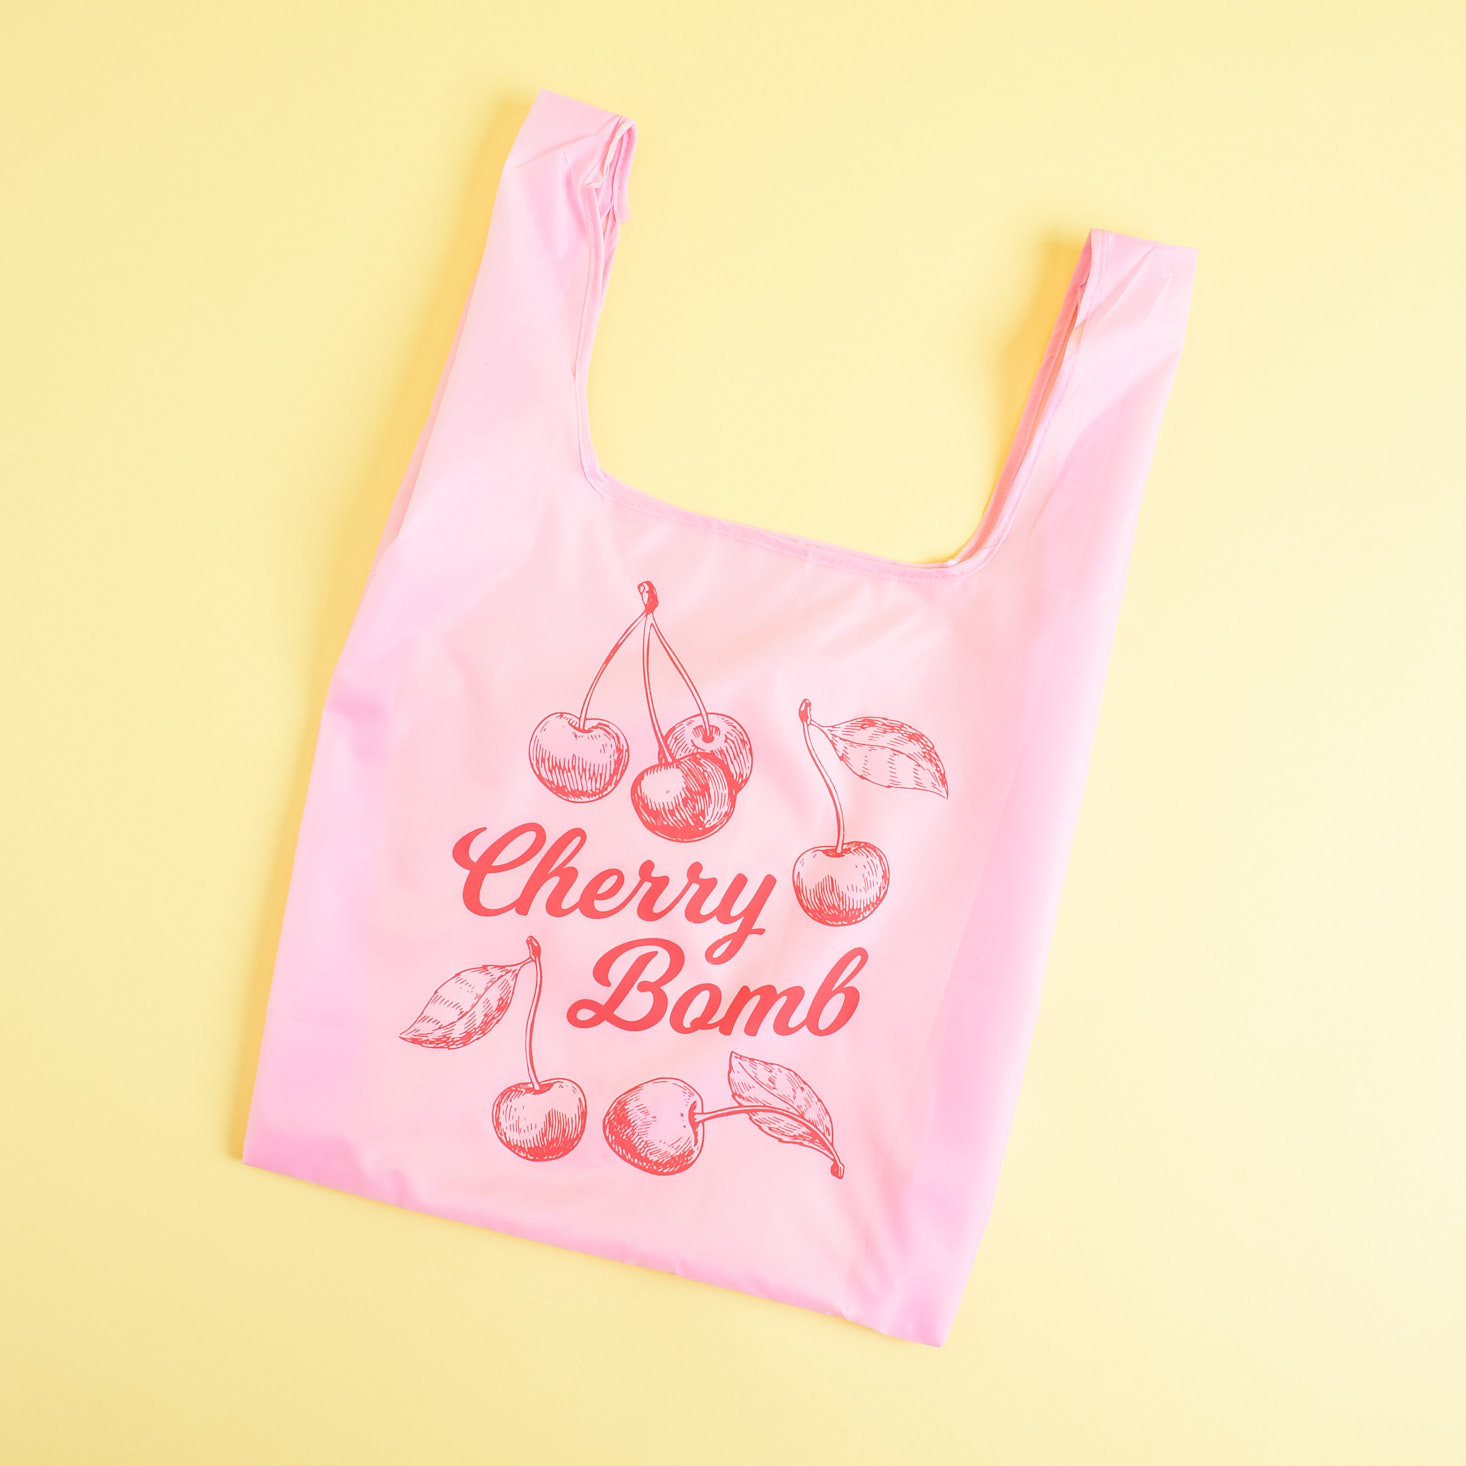 Pink Cherry Bomb reusable tote